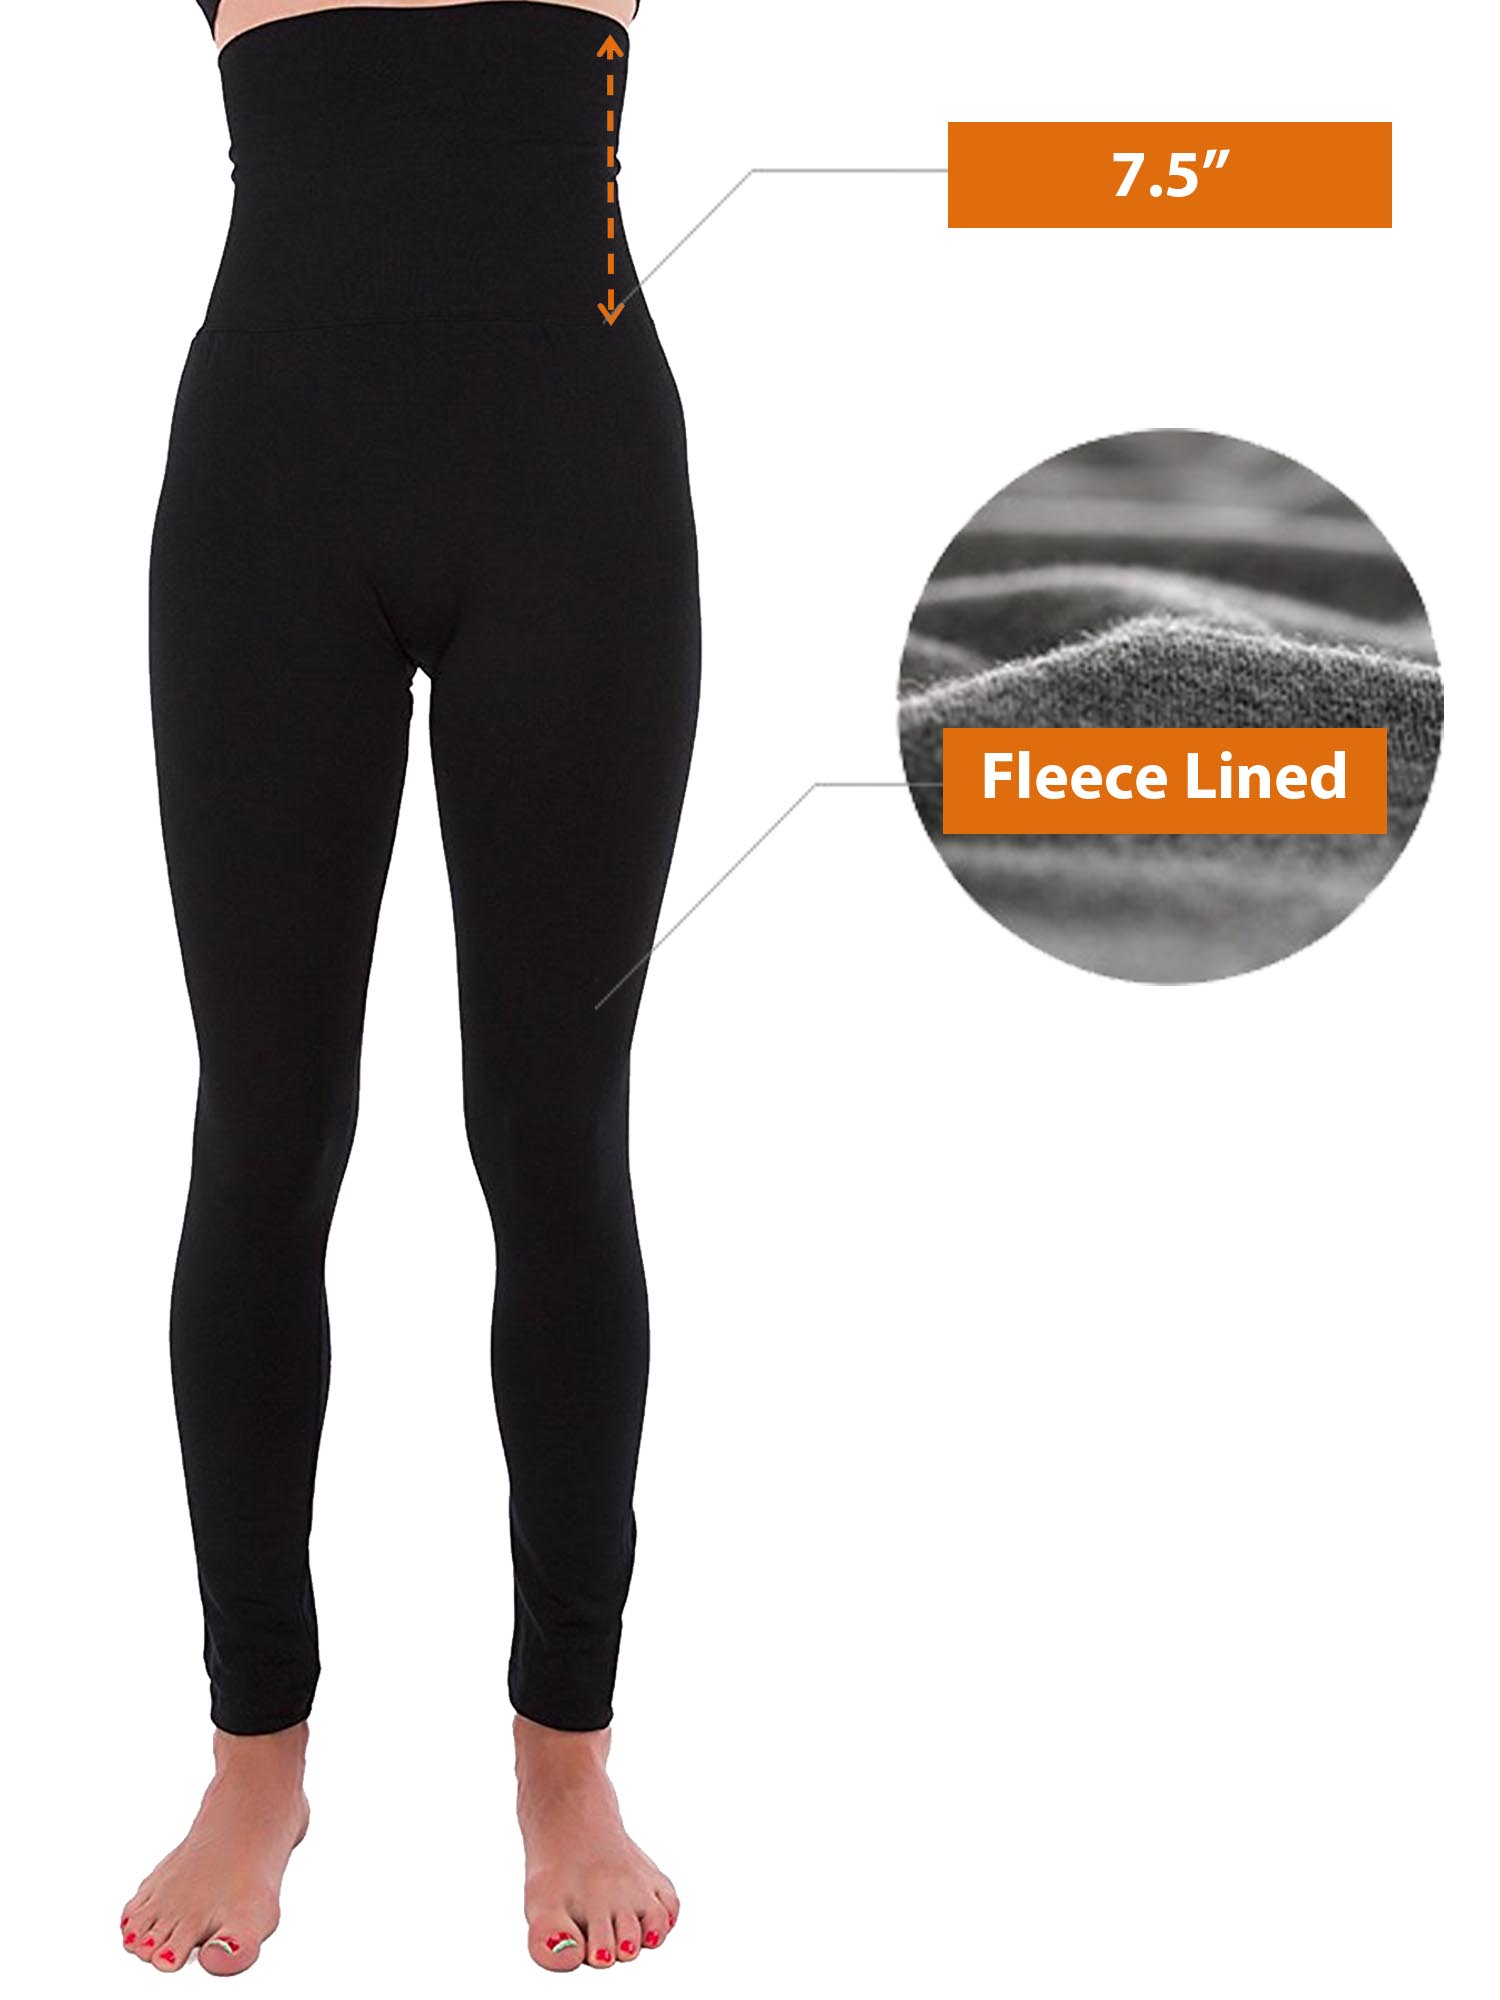 Women's High Waist Tummy Control Fleece Lined Legging Winter Warm Compression Top Thermal Pants - image 3 of 6